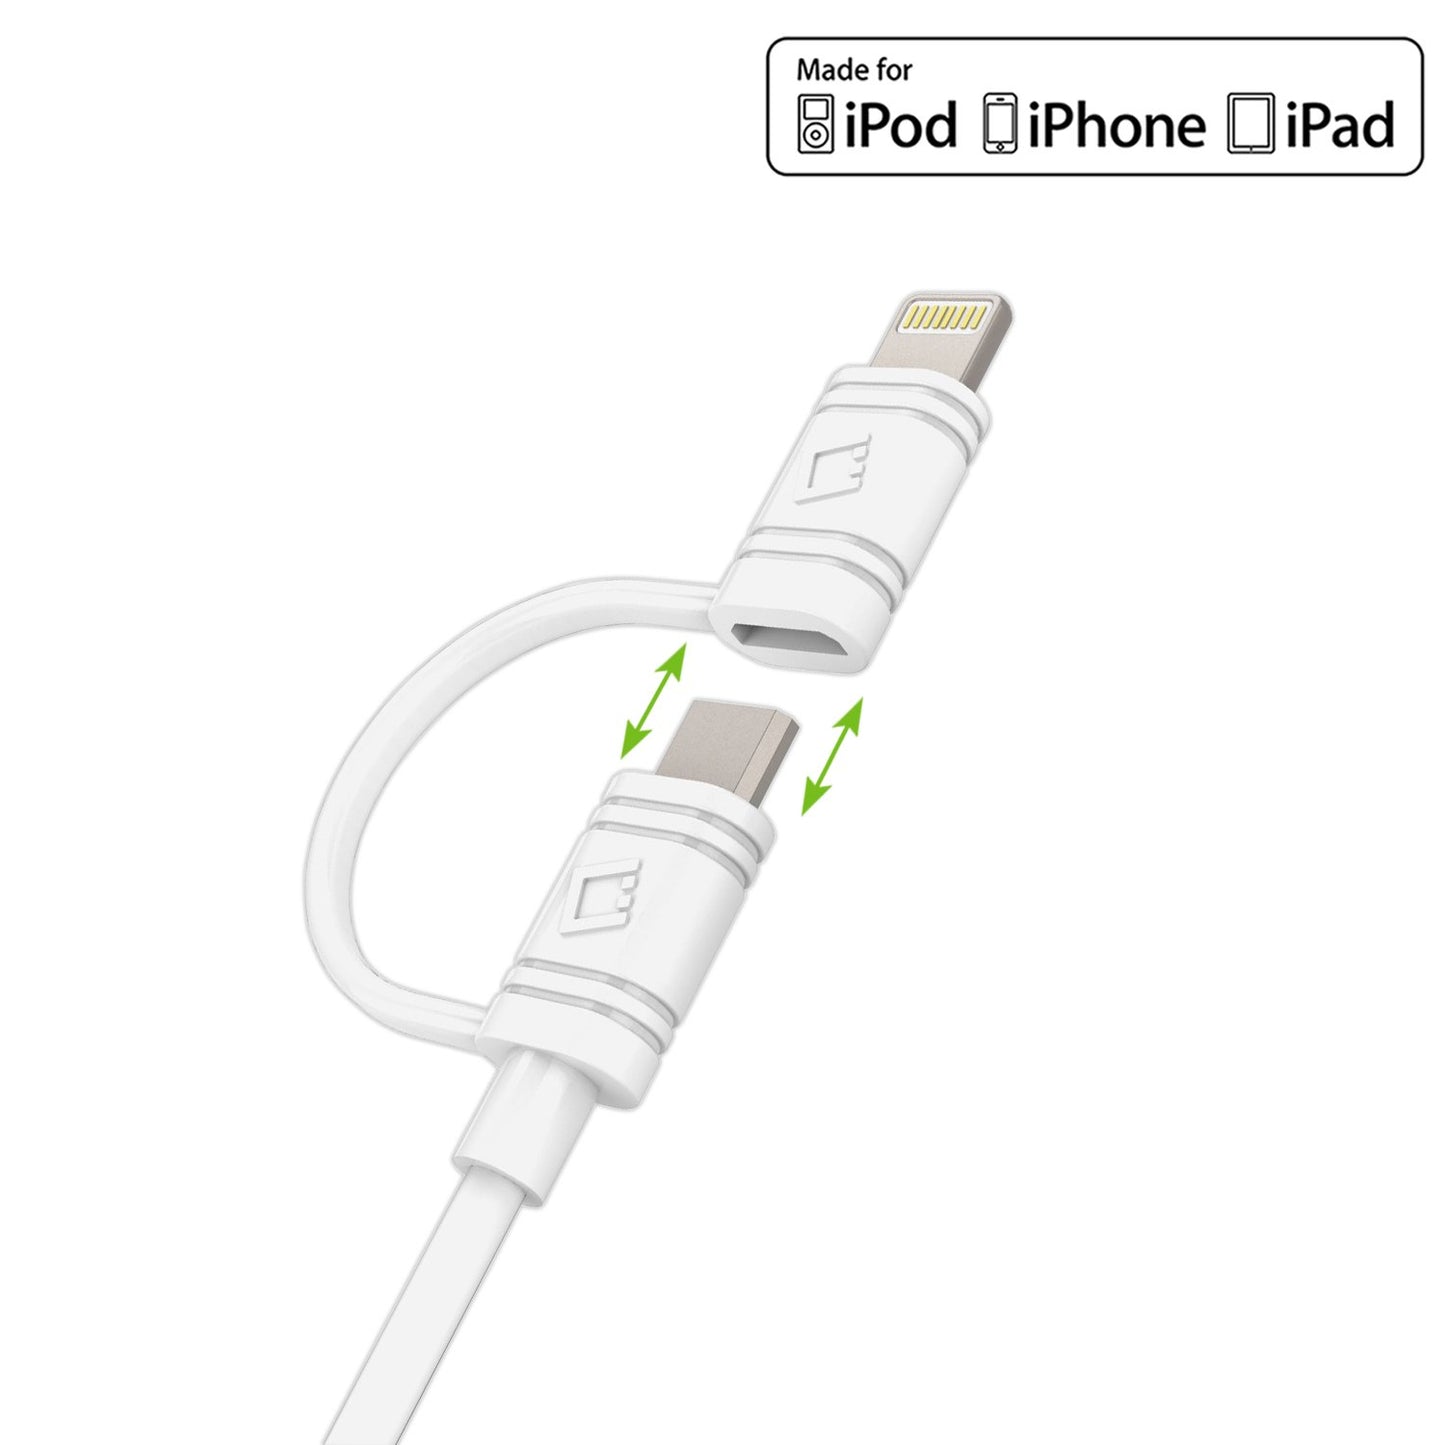 DAAPP5TKWT - Cellet 2 in 1 Micro USB + Lightning (Licensed by Apple, MFI Certified) Charging/Data Sync Cable - White